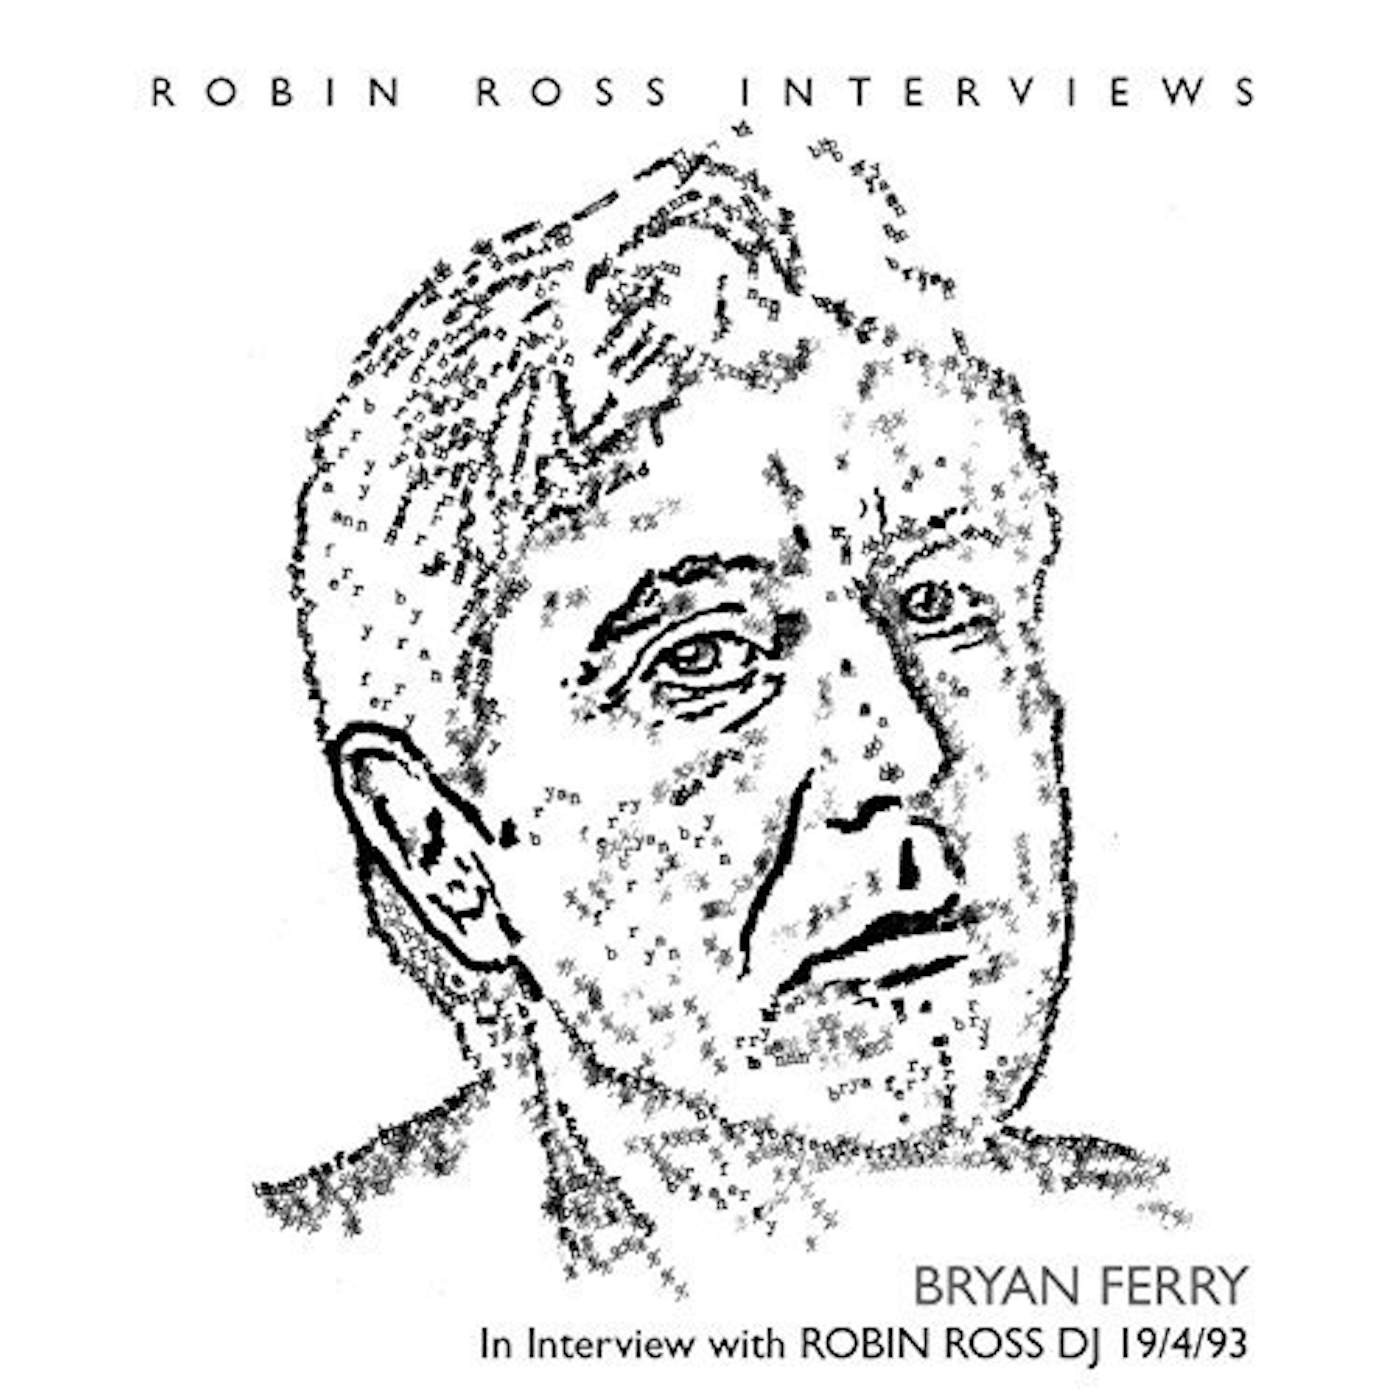 Bryan Ferry INTERVIEW WITH ROBIN ROSS 1994 CD